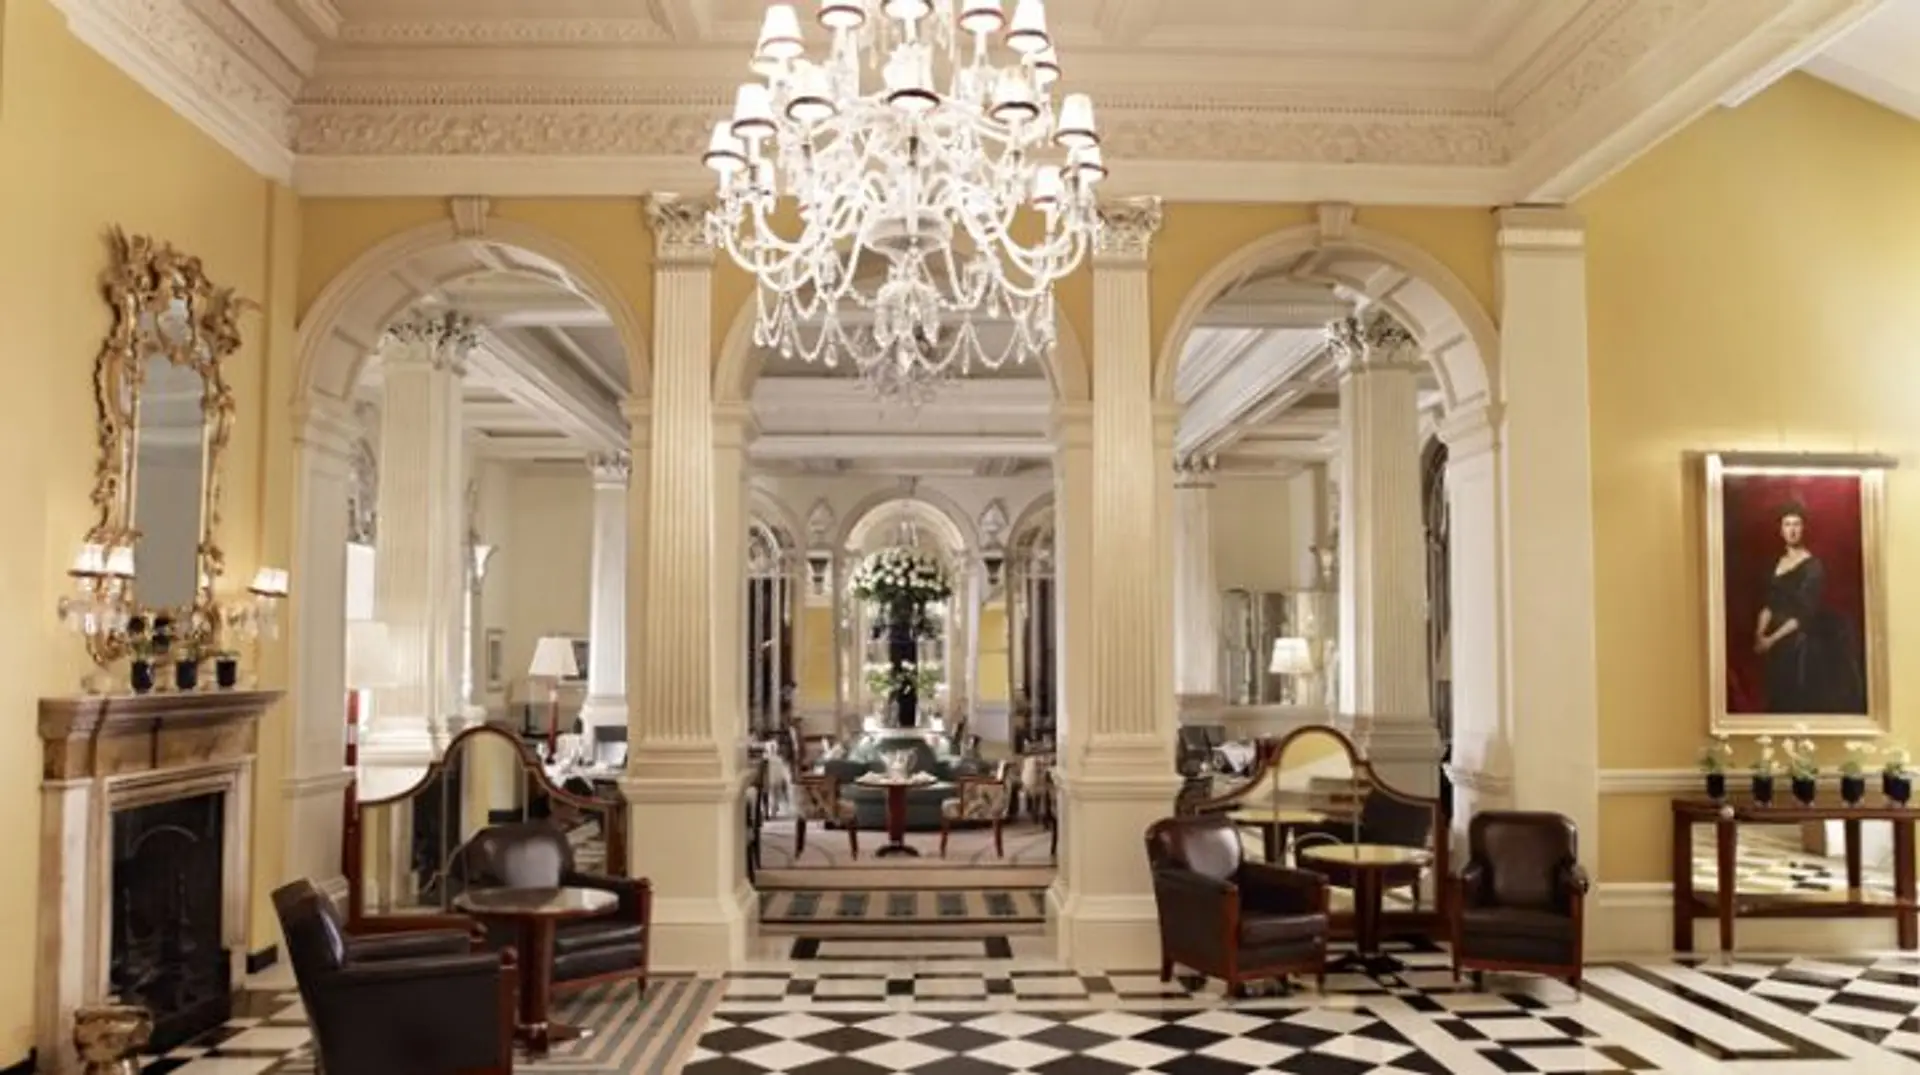 Hotels Toplists - Three historic hotels in London you should consider staying at